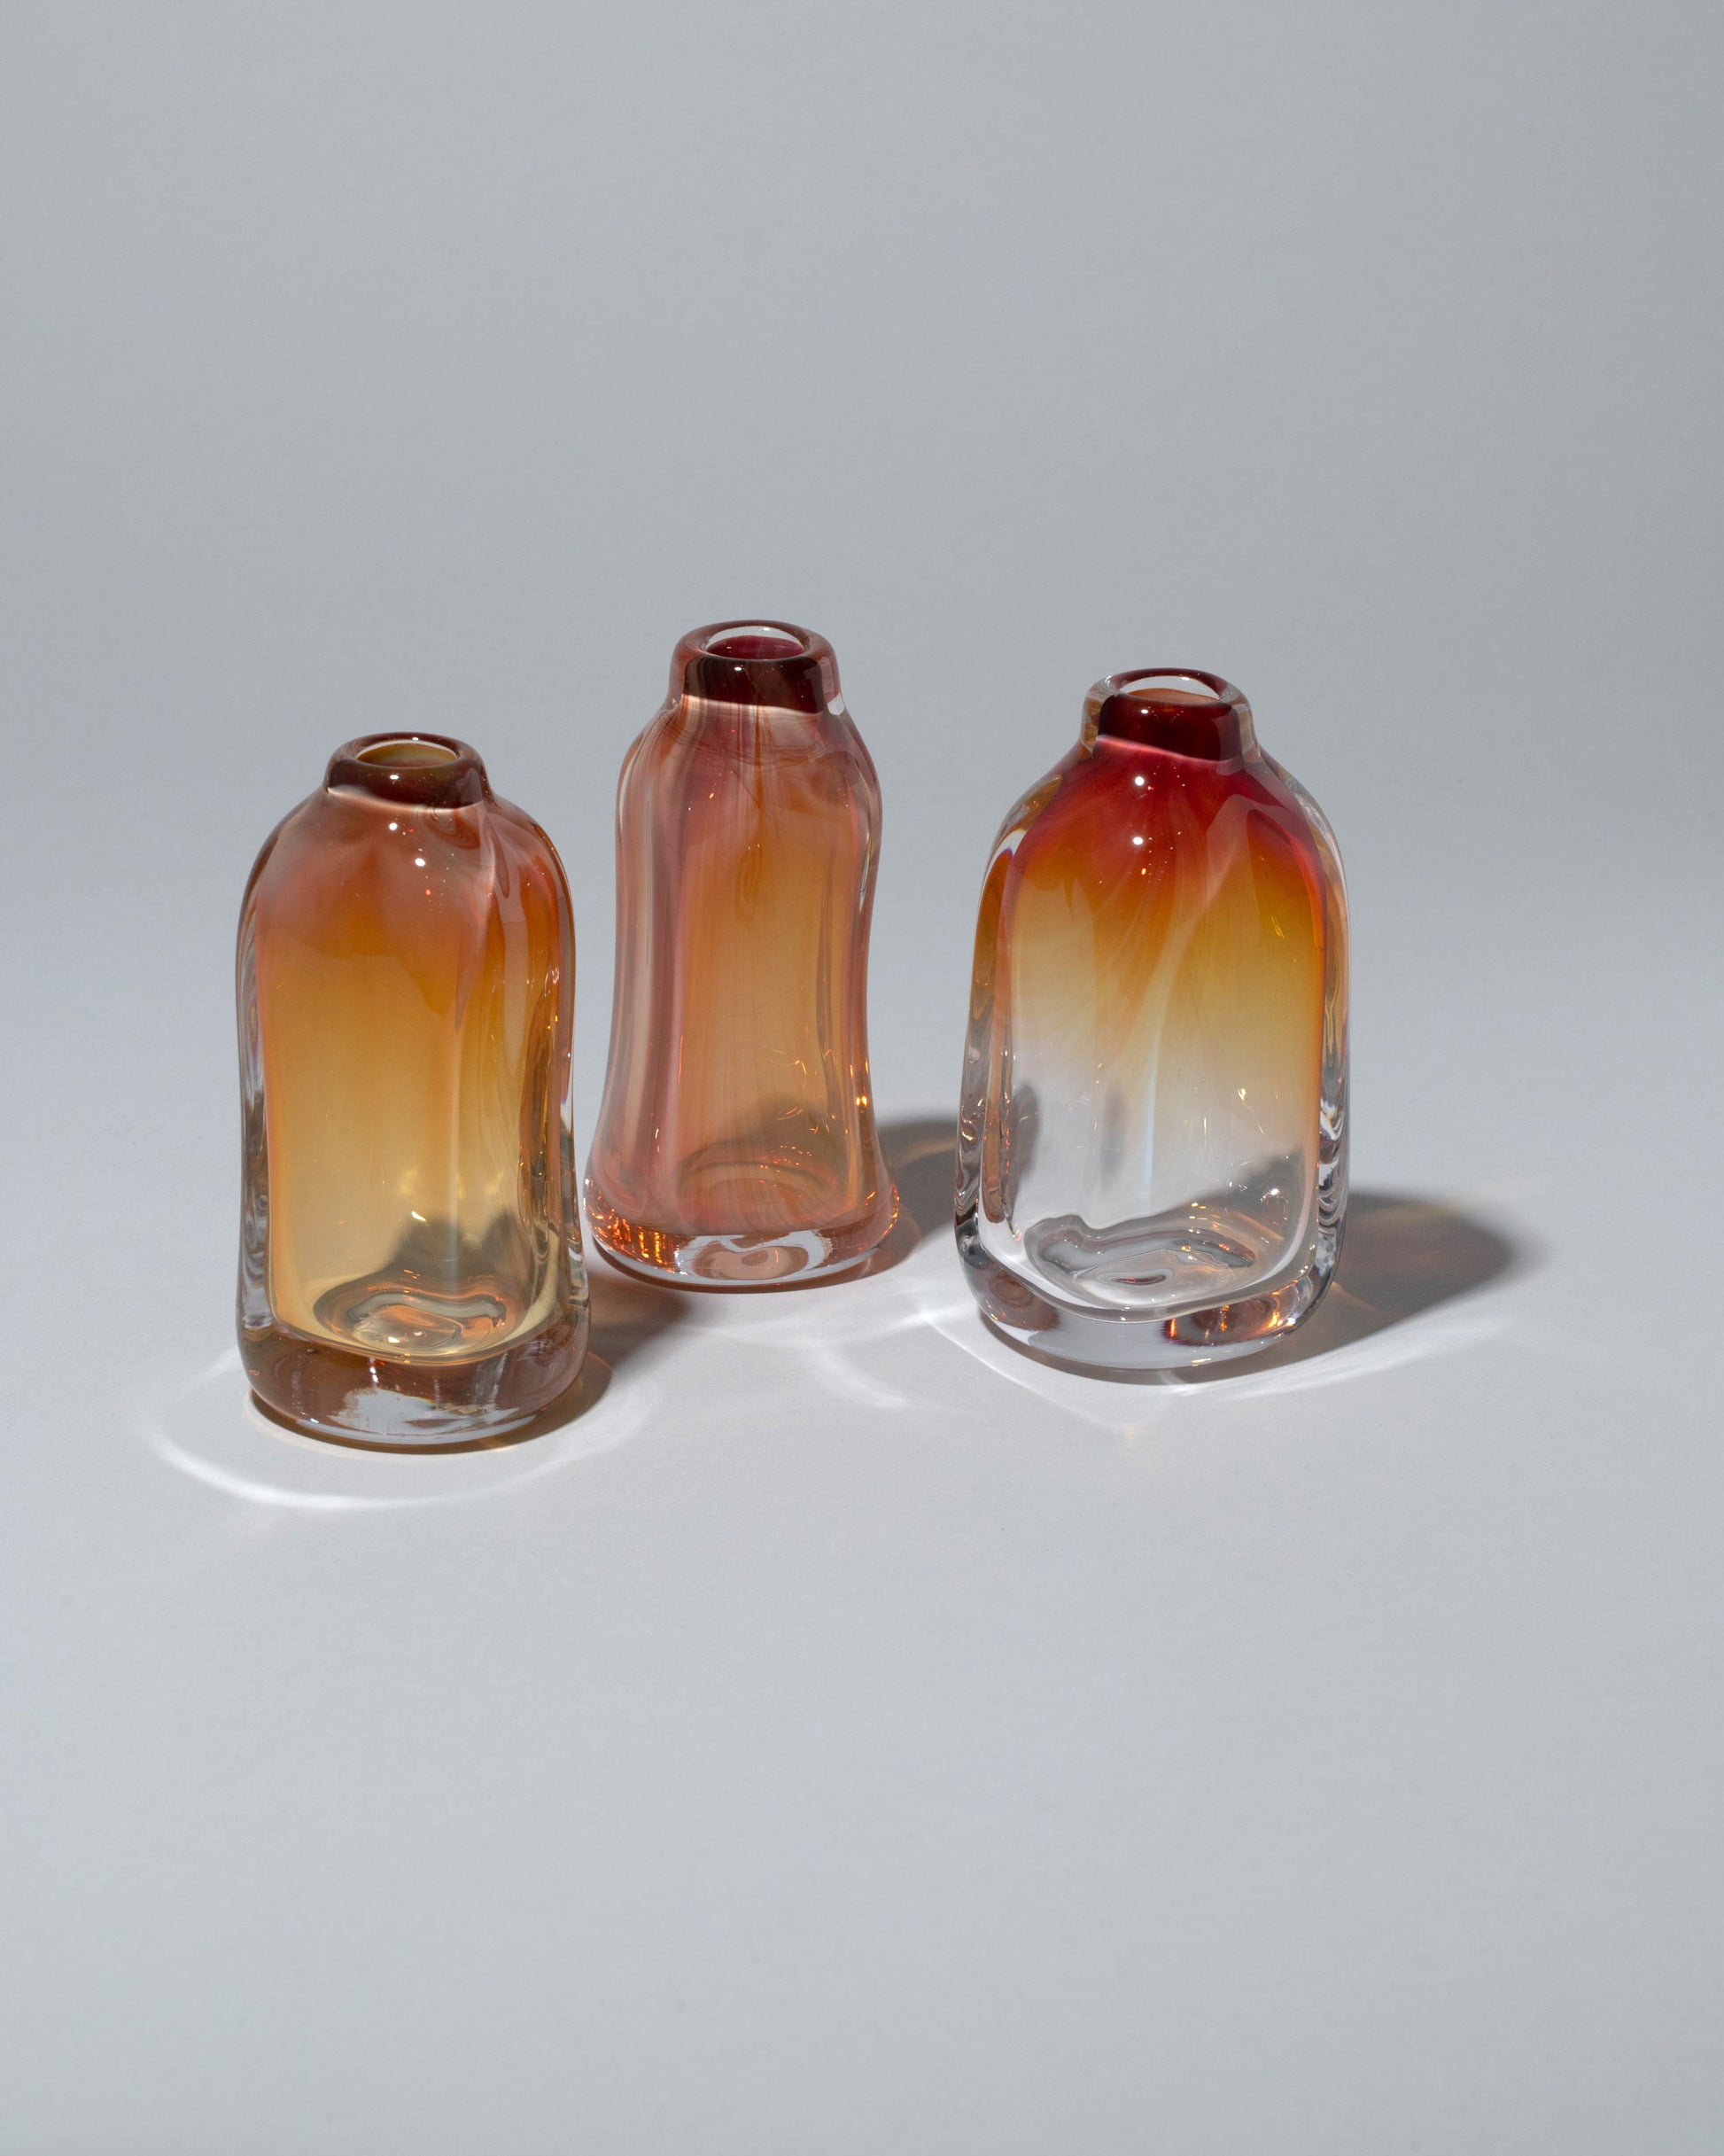 Group of BaleFire Glass Small Firewood Grain Suspension Vases on light color background.